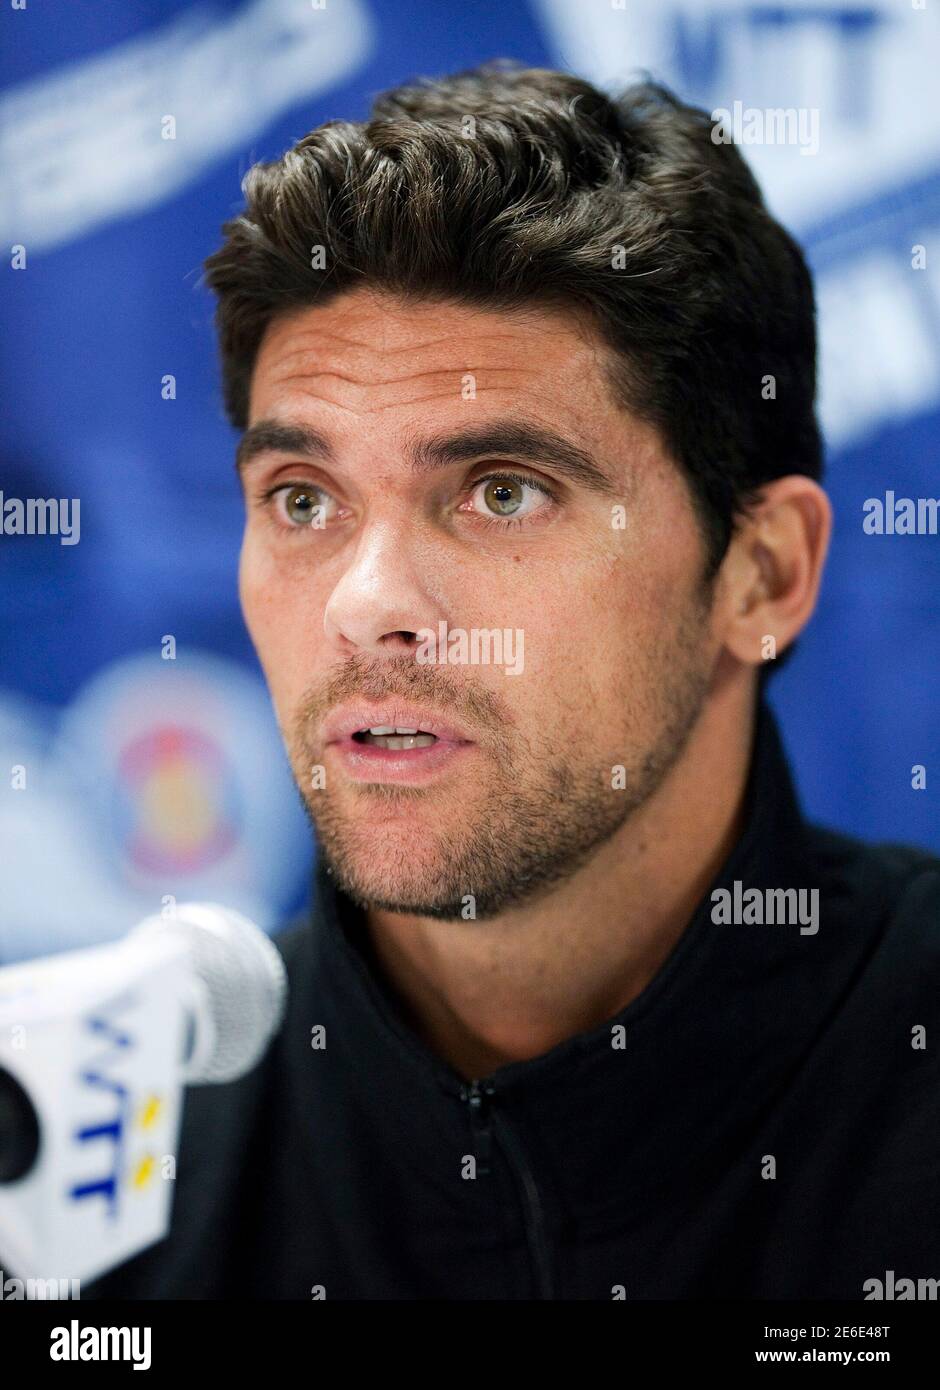 Mark Philippoussis speaks at a news conference for the World Team Tennis Smash Hits fundraiser in Washington November 15, 2010. The event will raise money for the Elton John AIDS Foundation and local Washington, D.C. Area AIDS charities, according to the World Team Tennis website. REUTERS/Joshua Roberts  (UNITED STATES - Tags: SPORT ENTERTAINMENT TENNIS HEADSHOT) Stock Photo